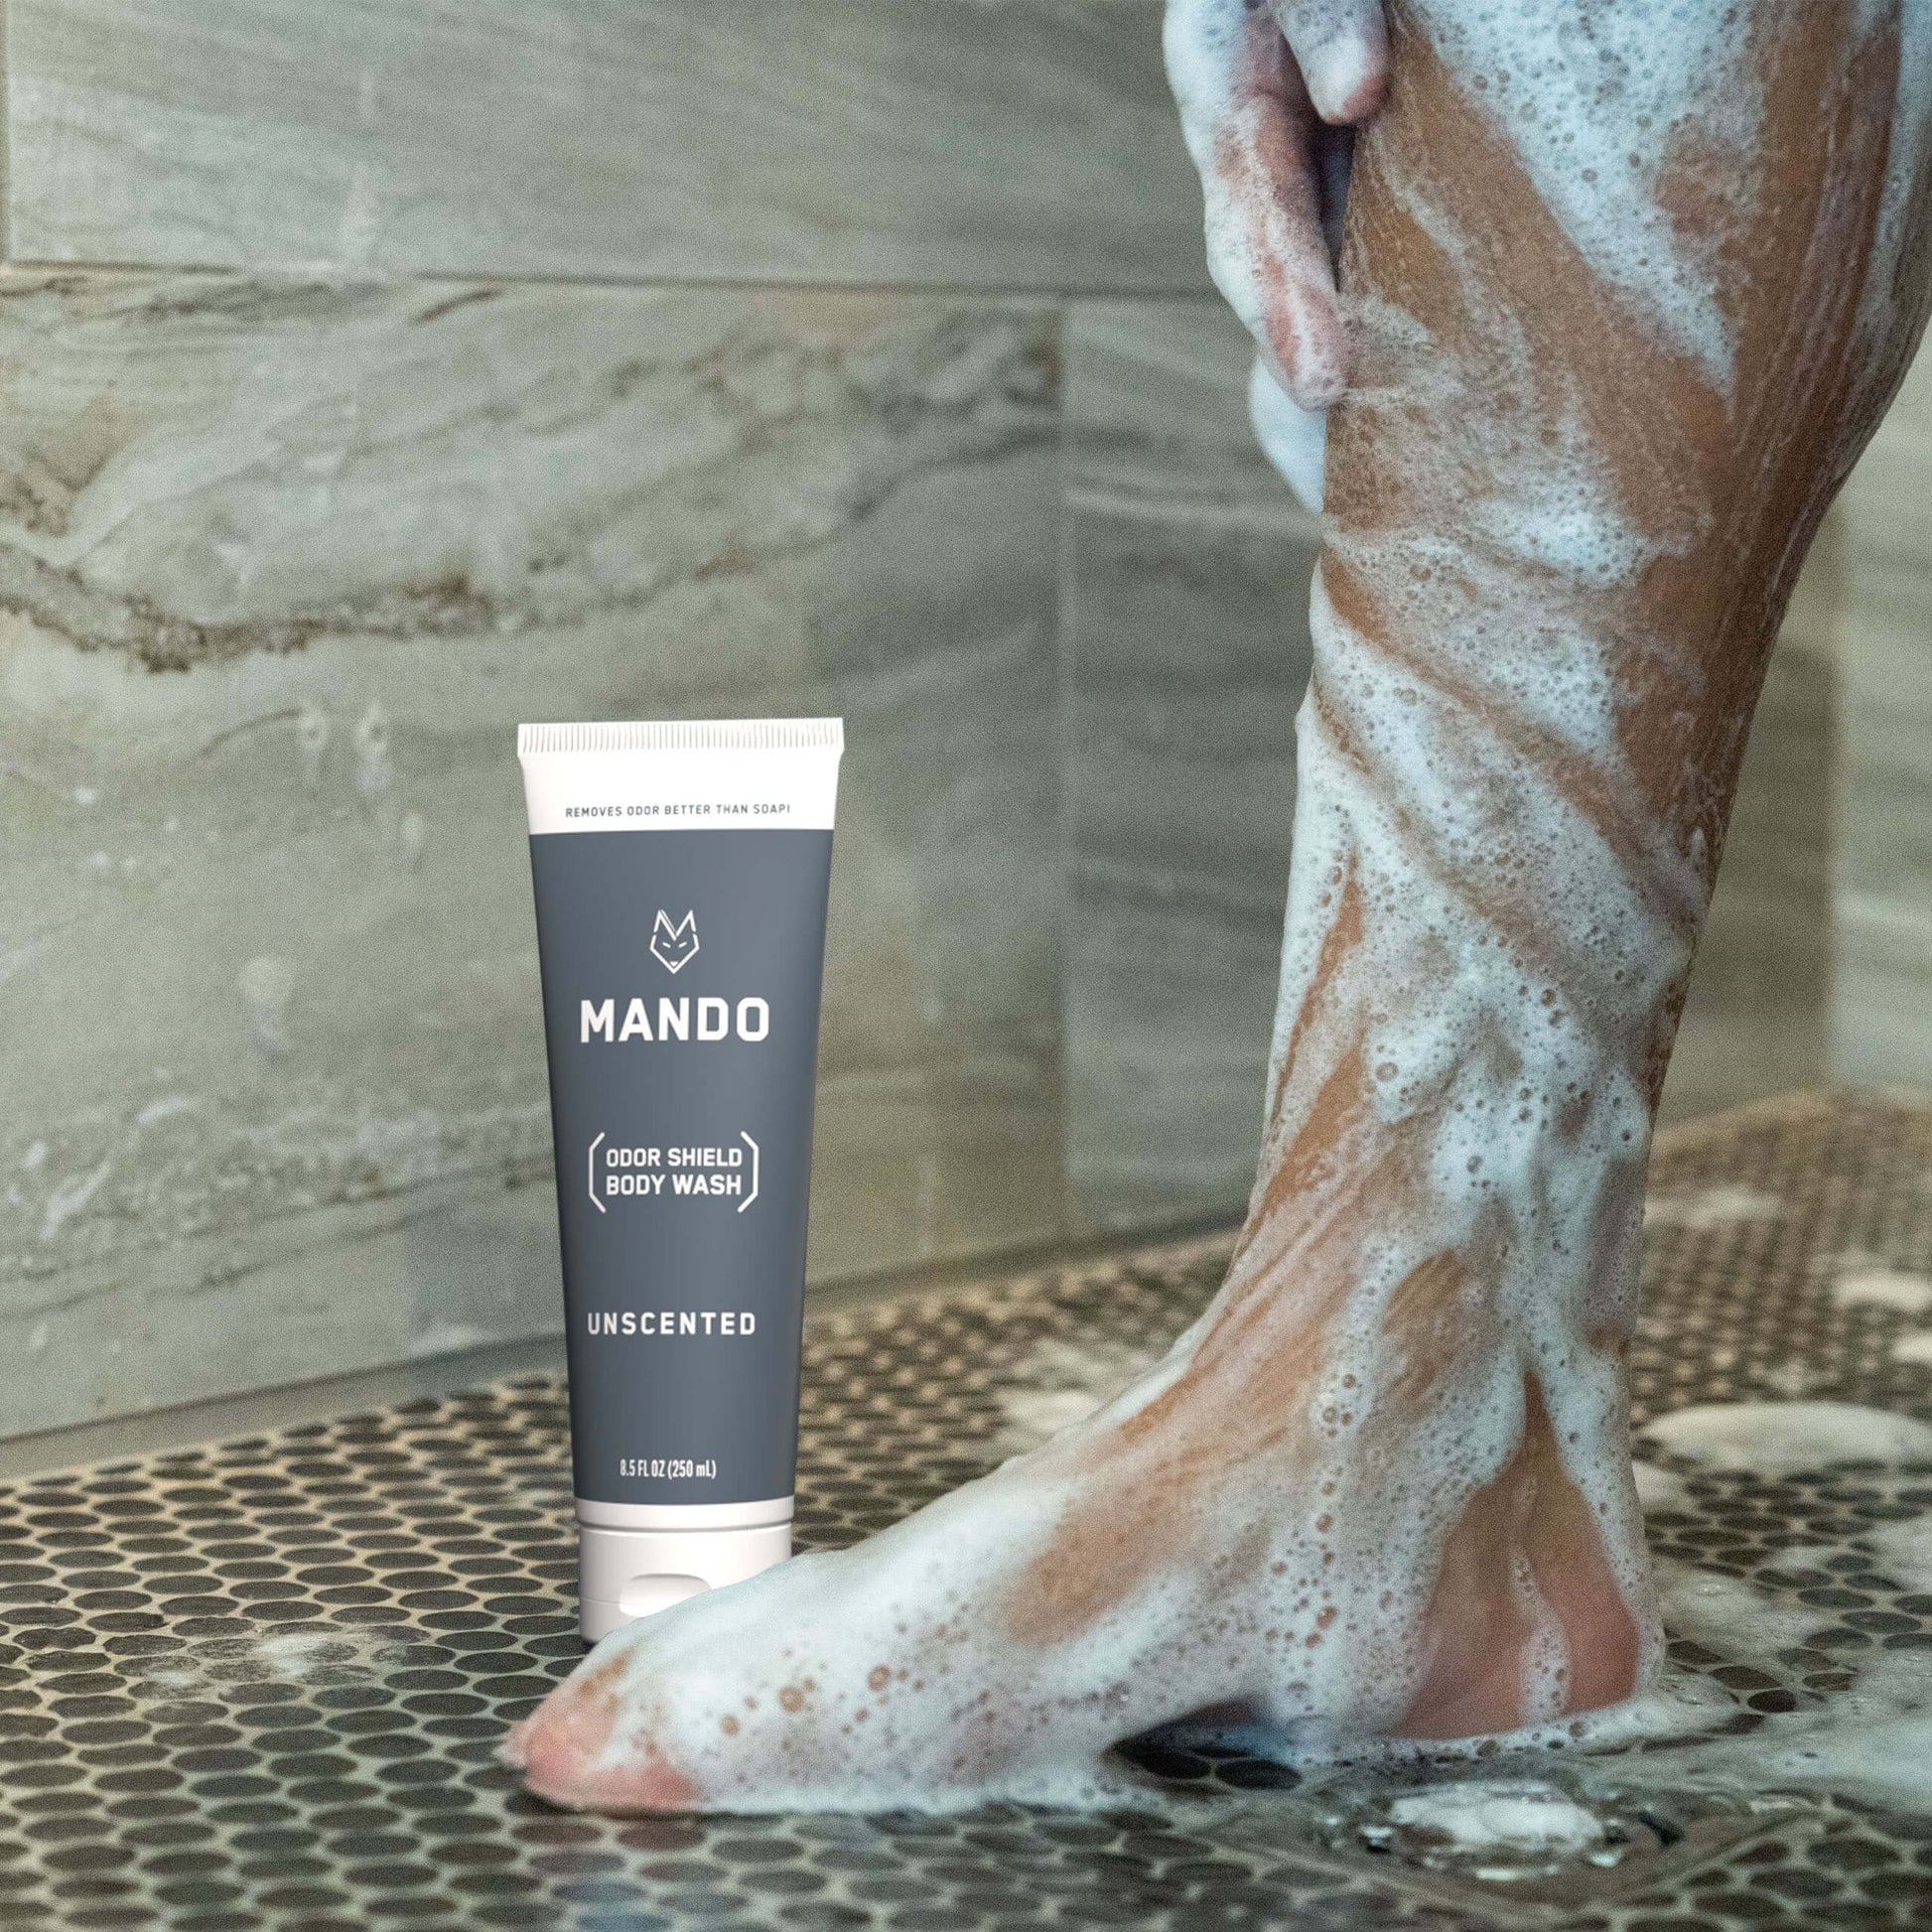 person lathering soap on leg with grey tube of Mando unscented body wash on shower floor